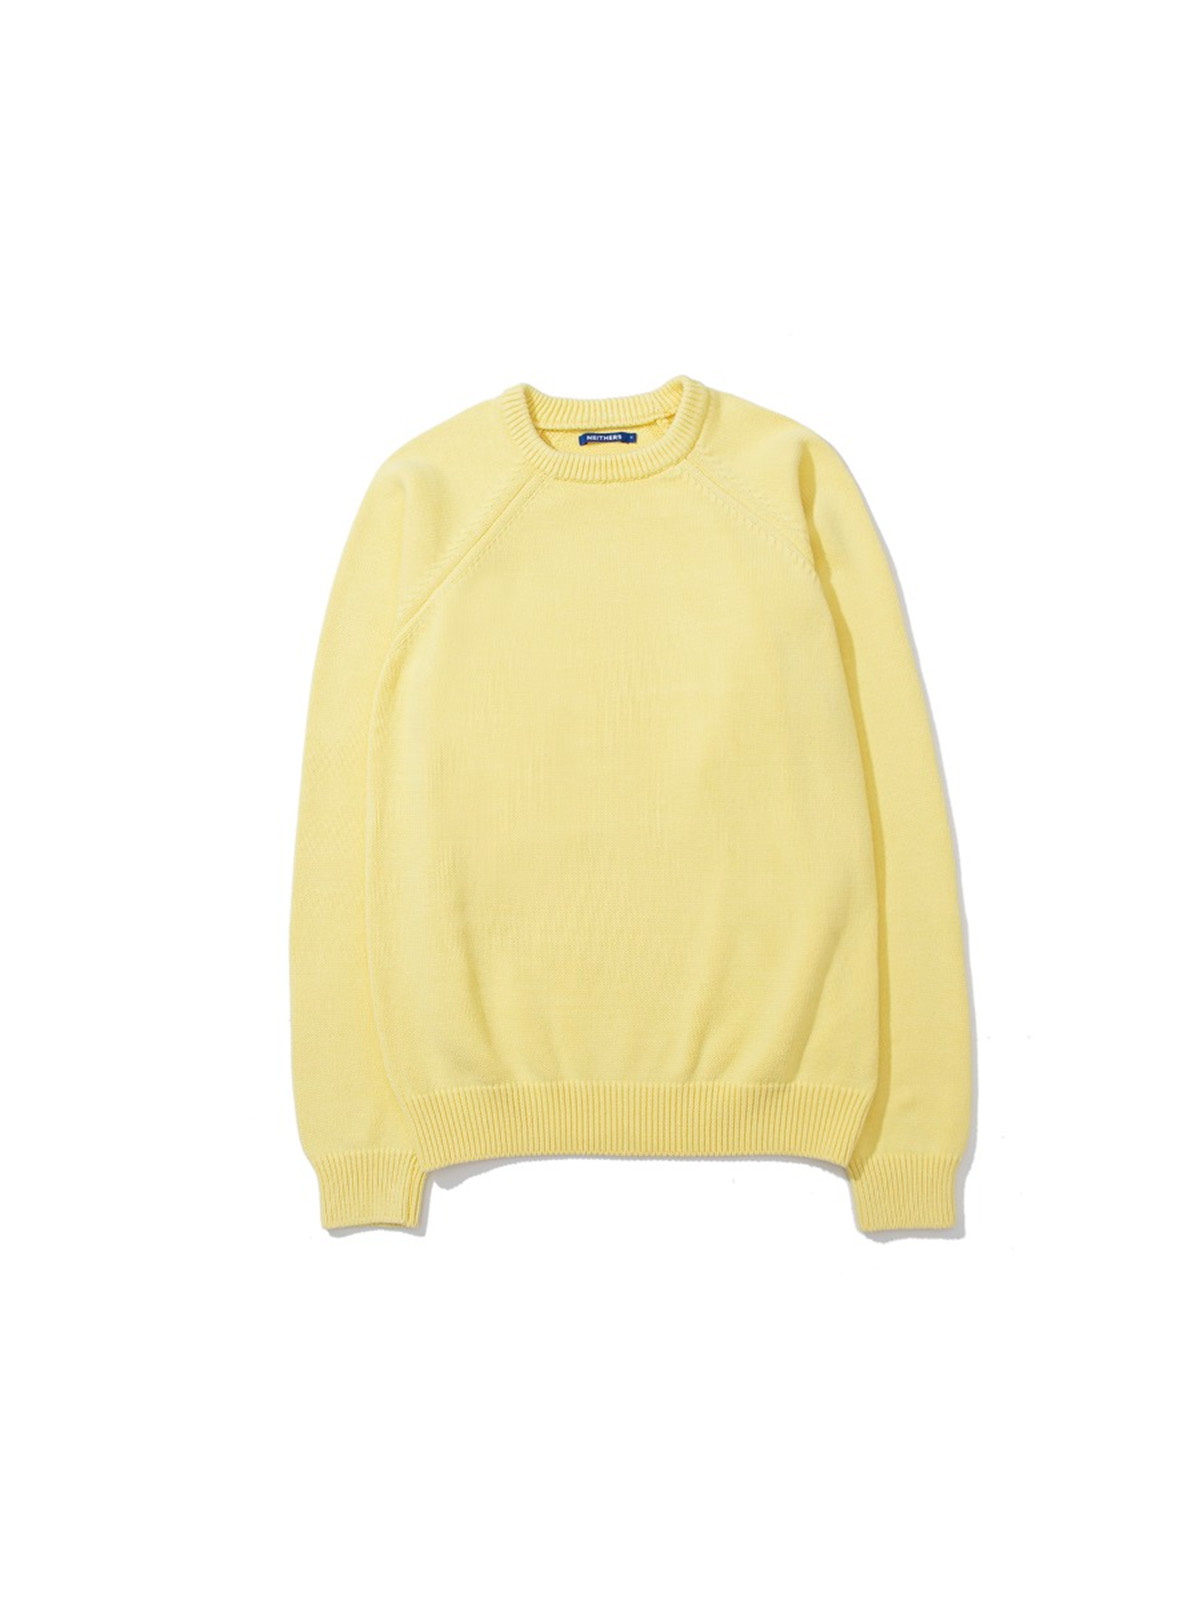 BOXER KNITTED SWEATER (YELLOW)